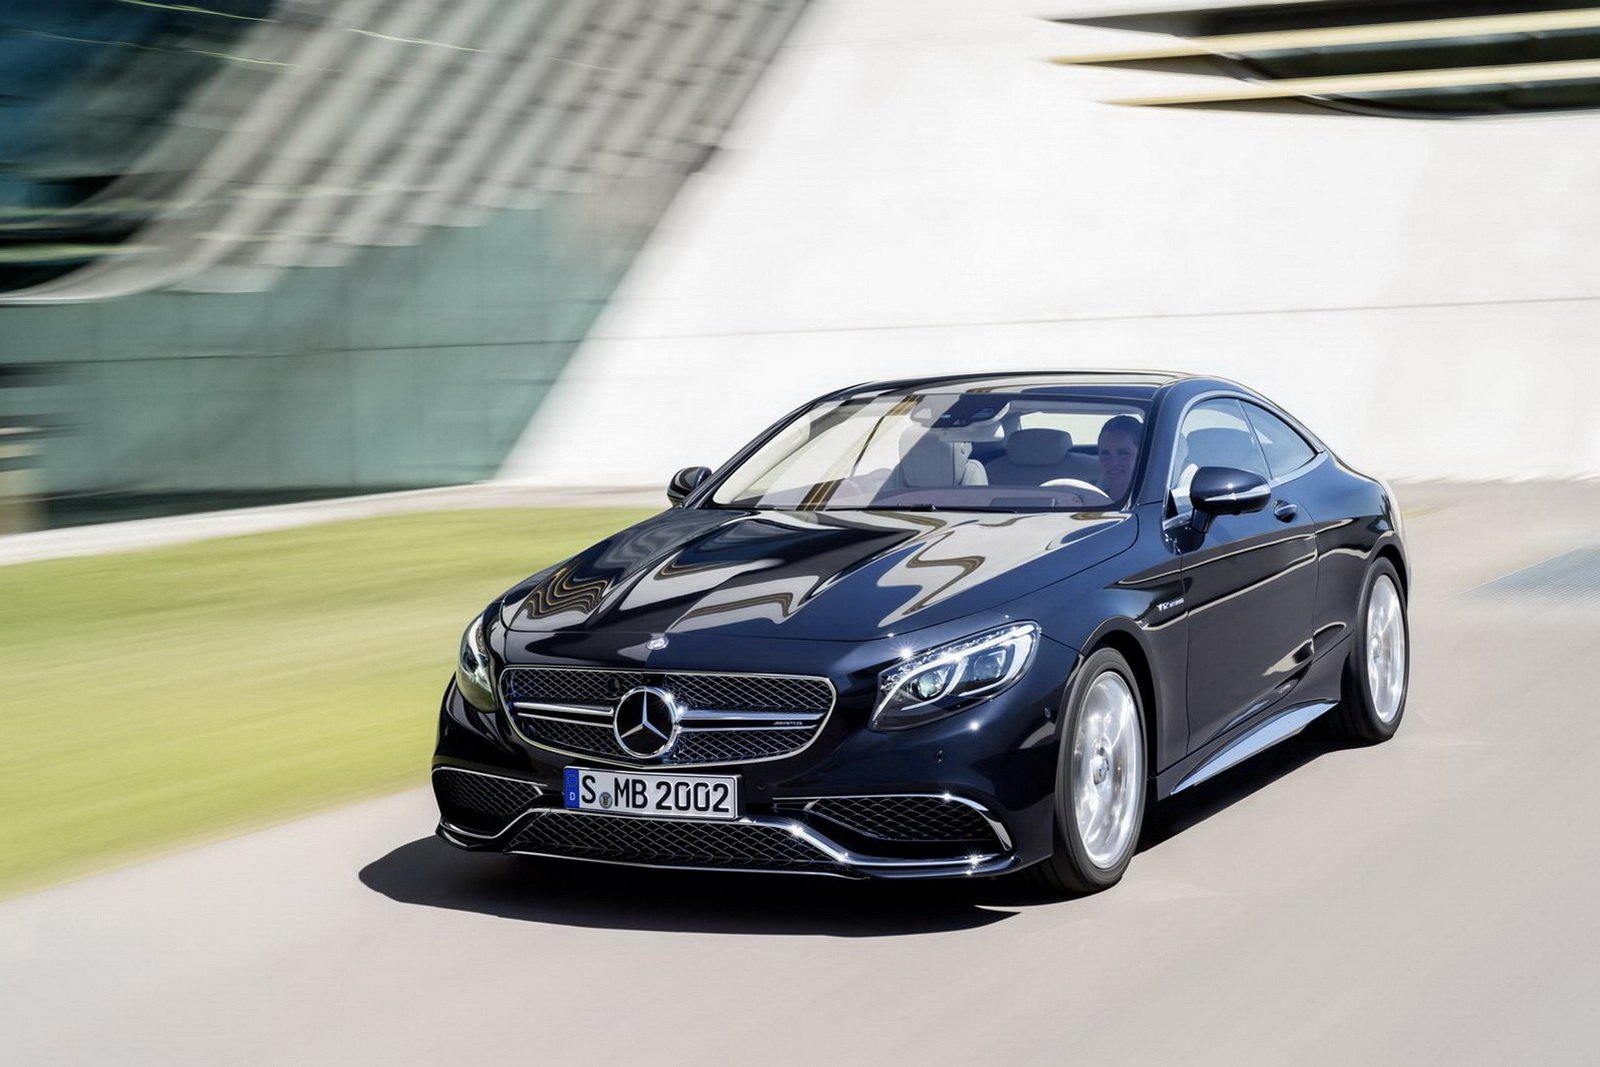 2014, Mercedes, S65, Amg, V12, Coupe, Germany Wallpaper